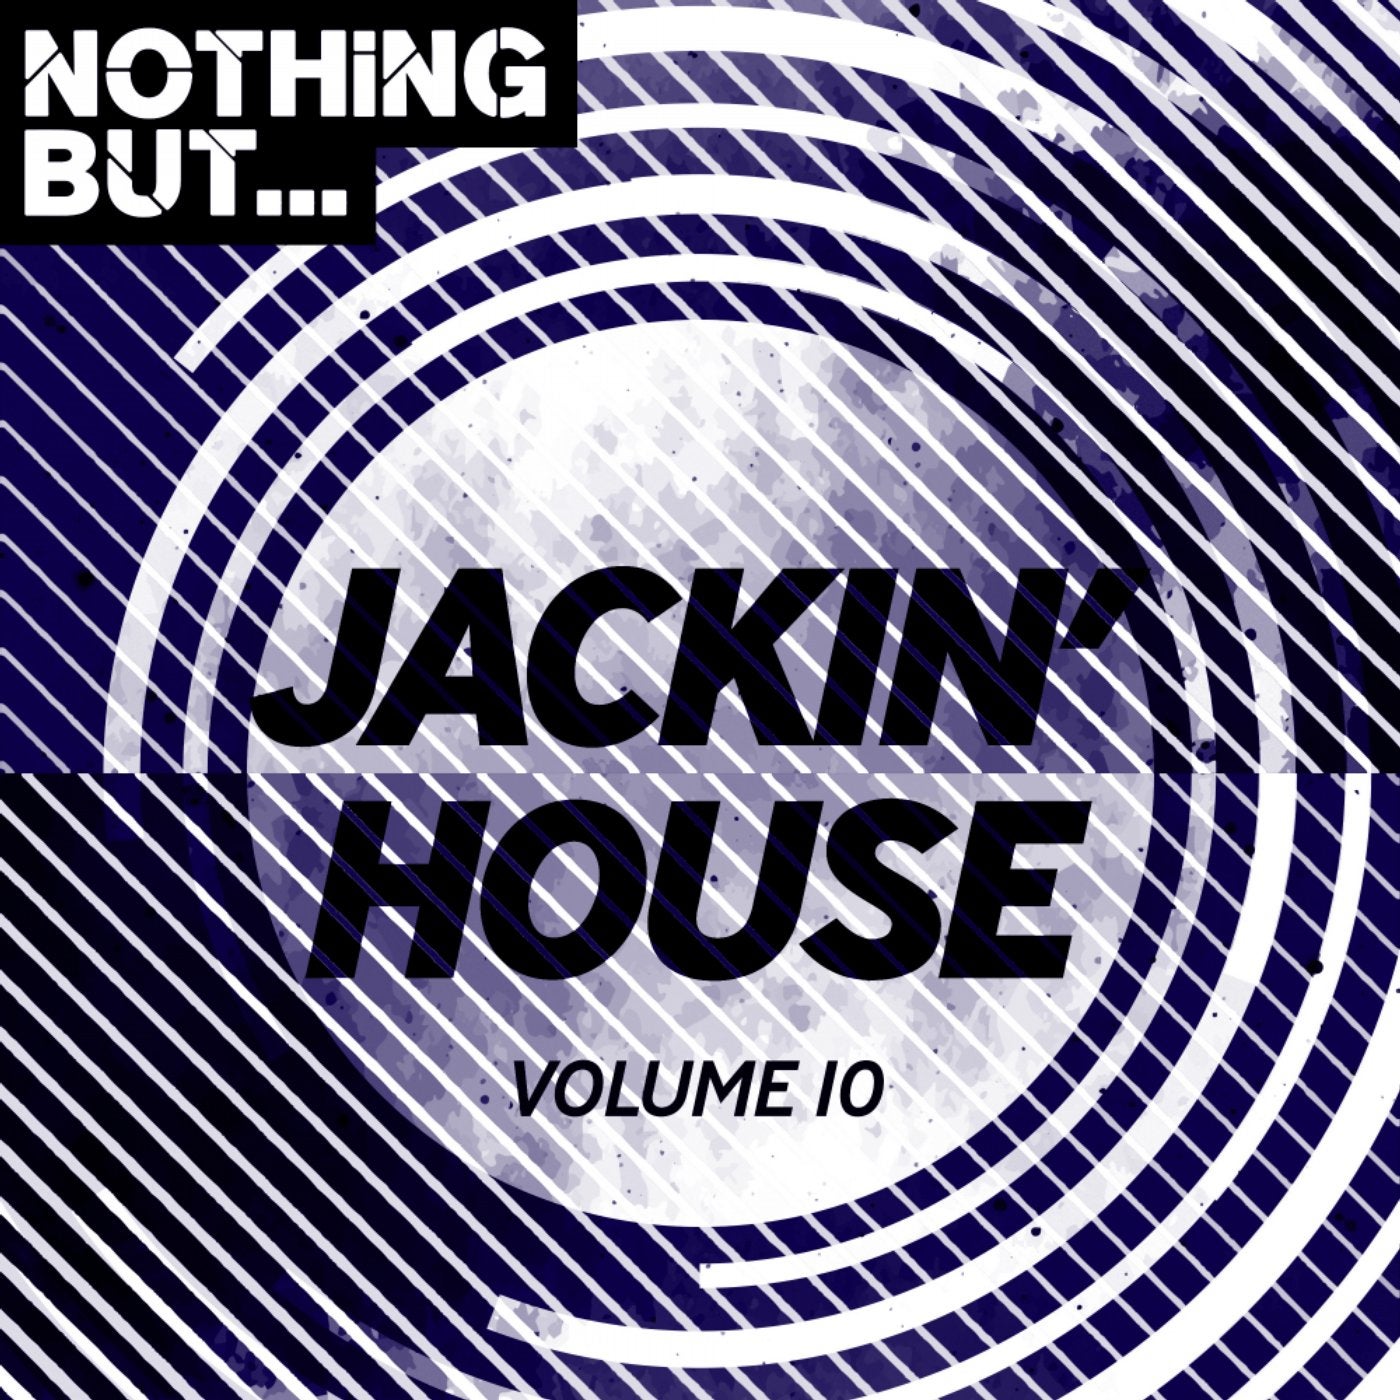 Nothing But... Jackin' House, Vol. 10